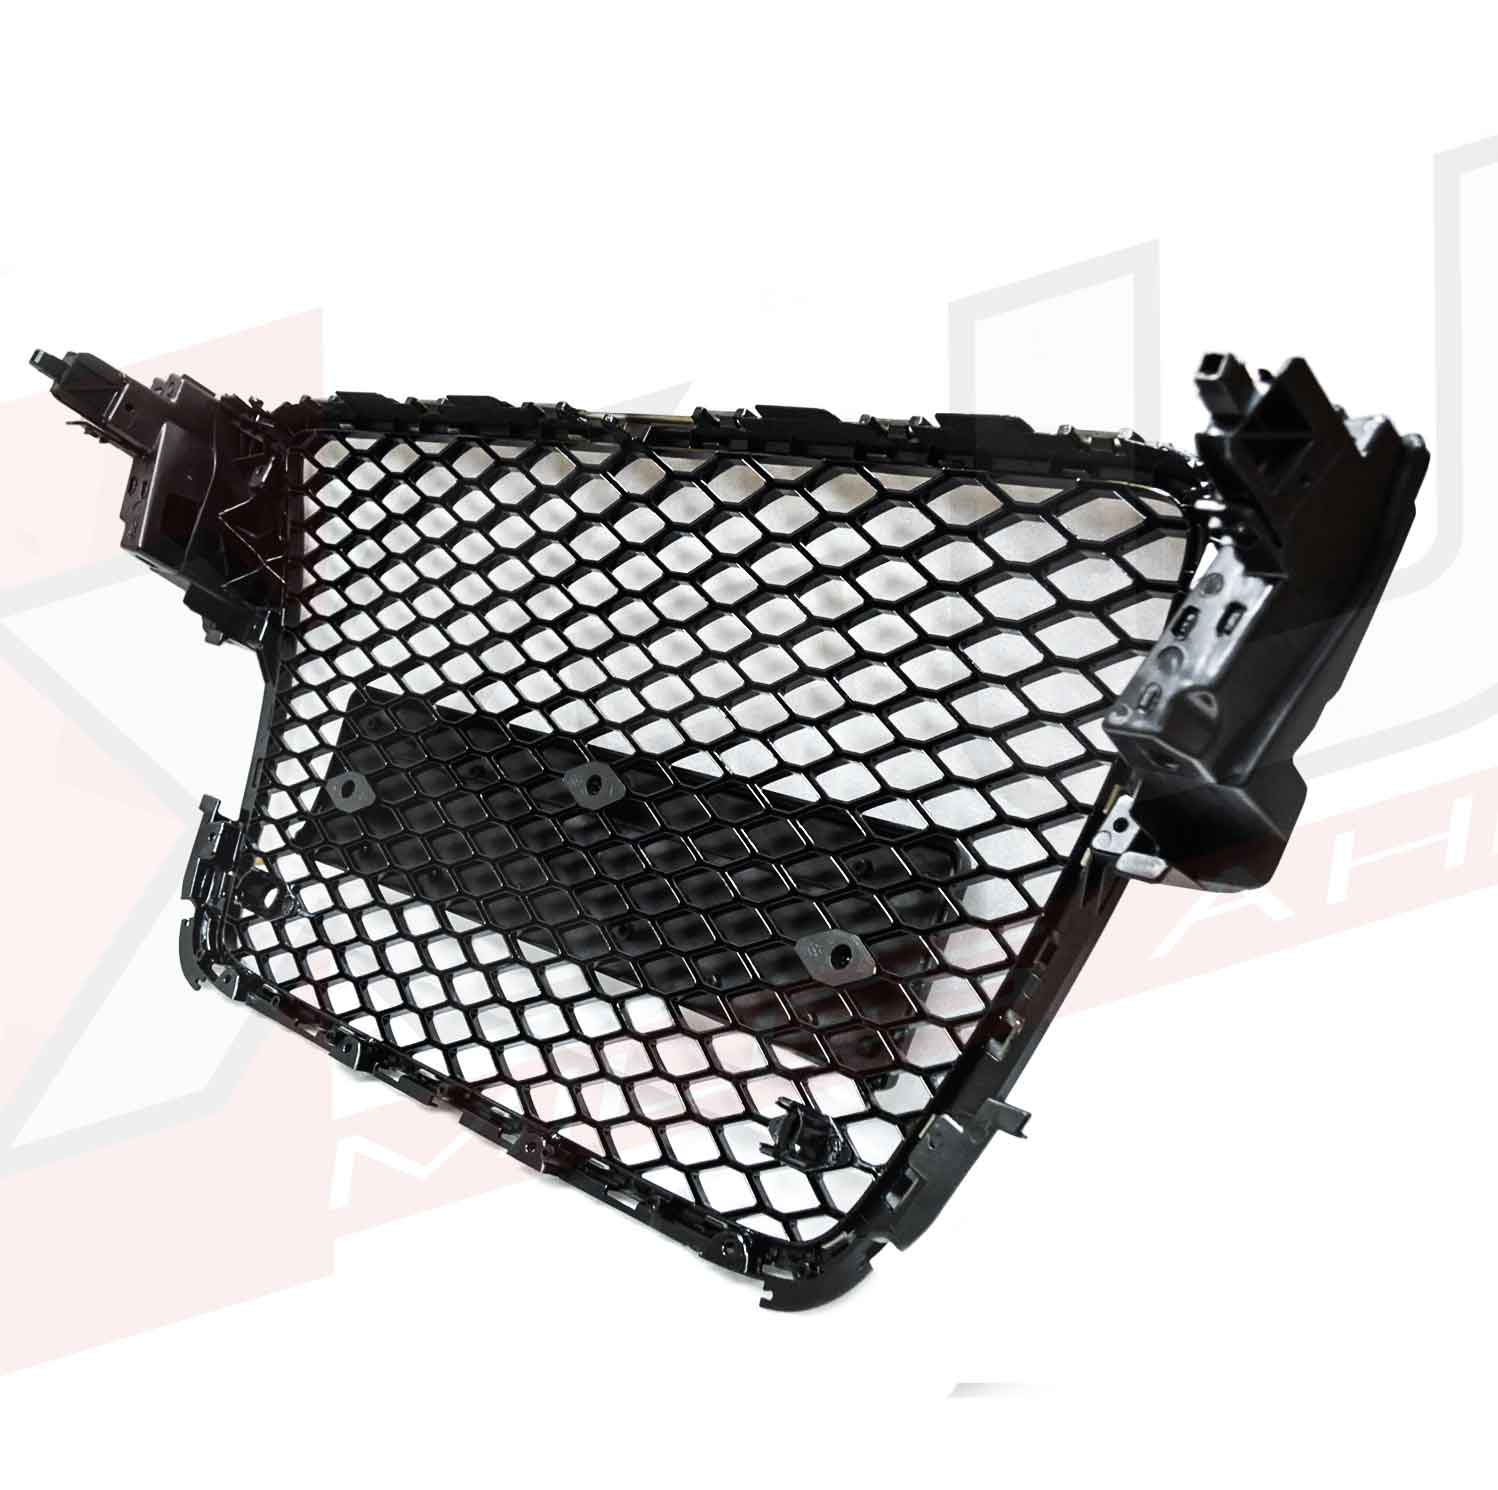 RS5 style honeycomb grill to fit Audi A5 and S5 2007-2012 B8